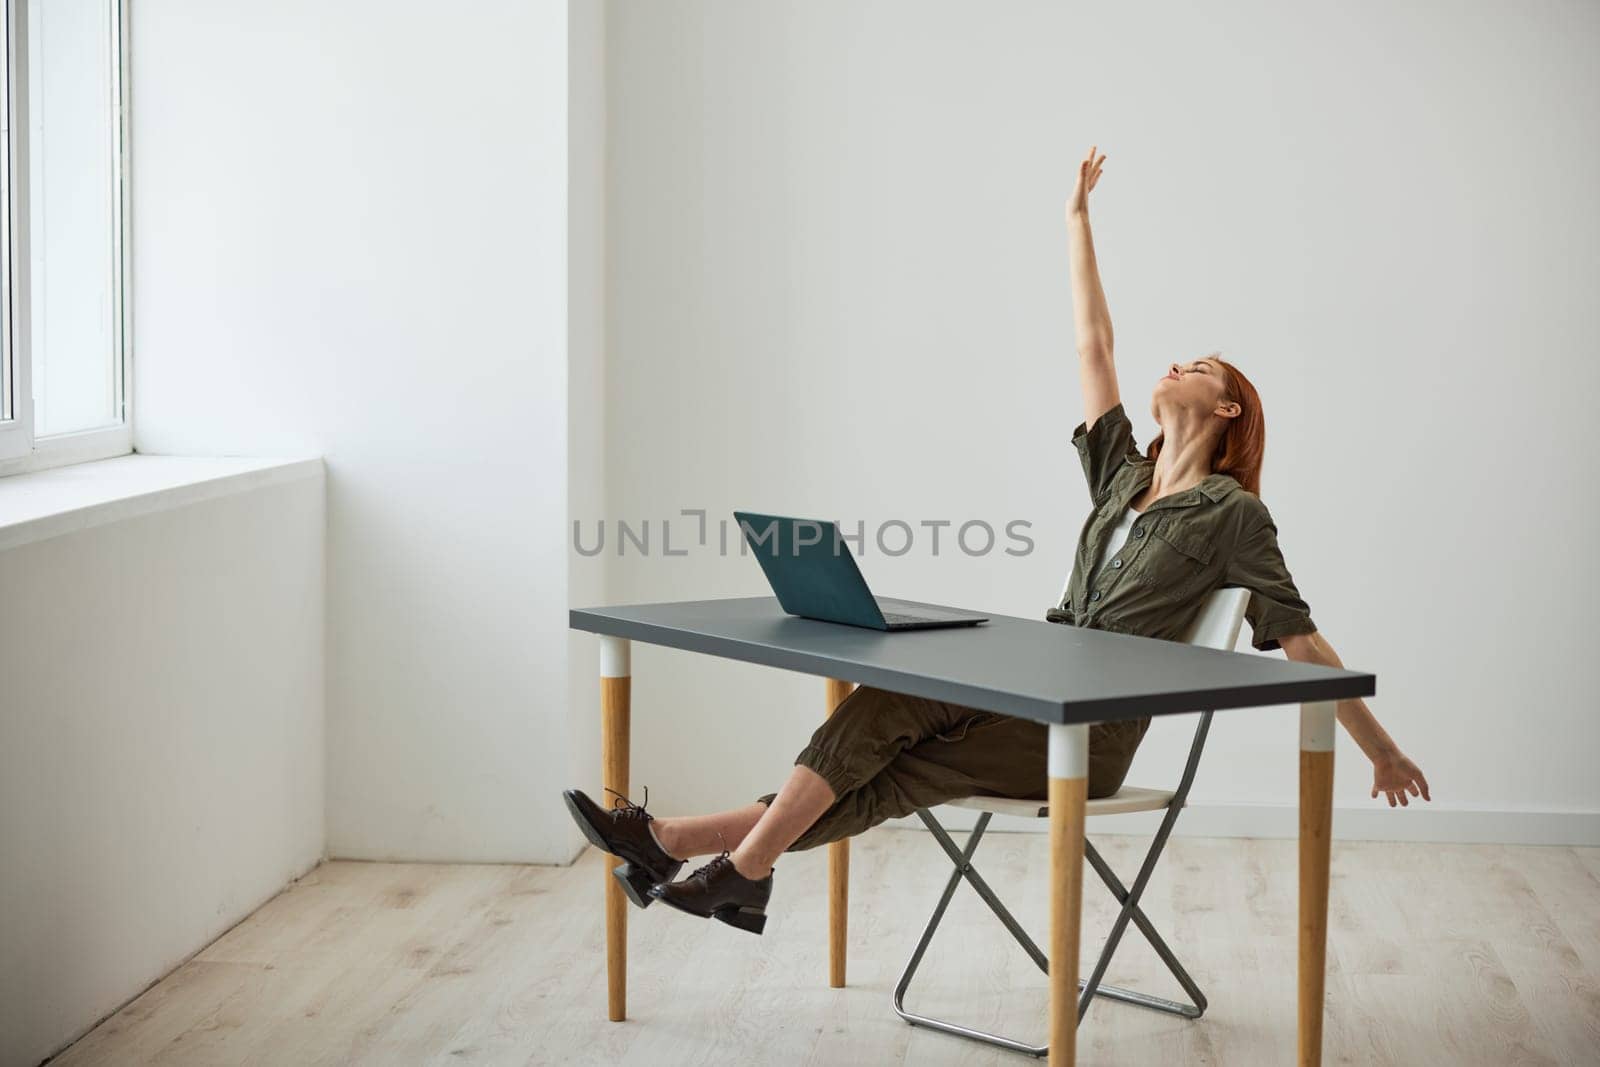 a very happy woman sits at a laptop and rejoices at the completed tasks raising her hands up. High quality photo